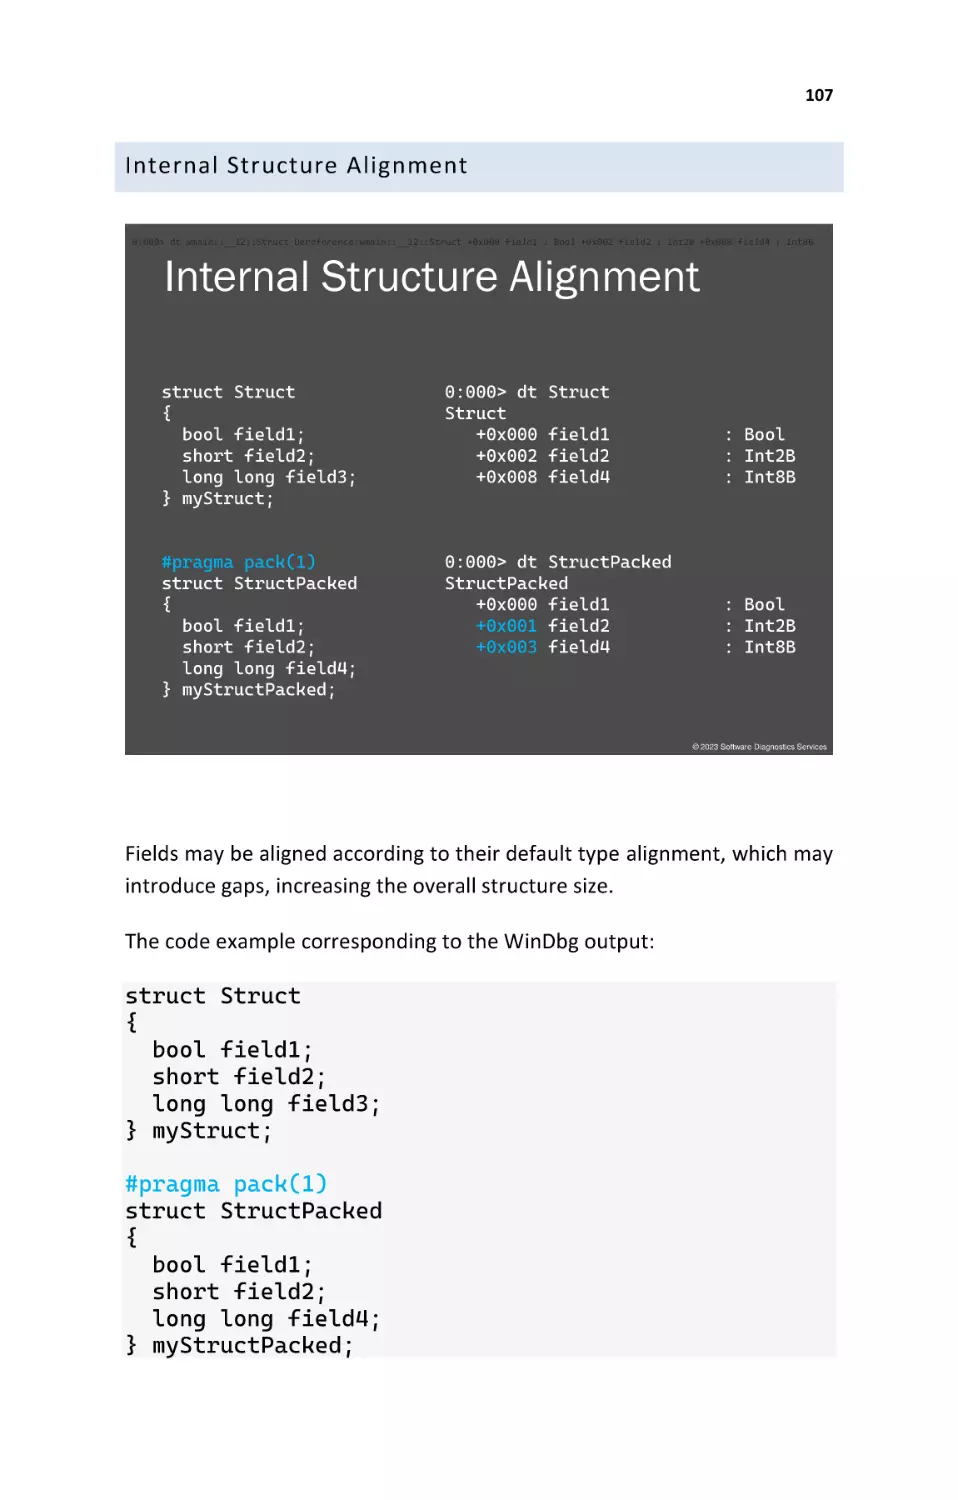 Internal Structure Alignment